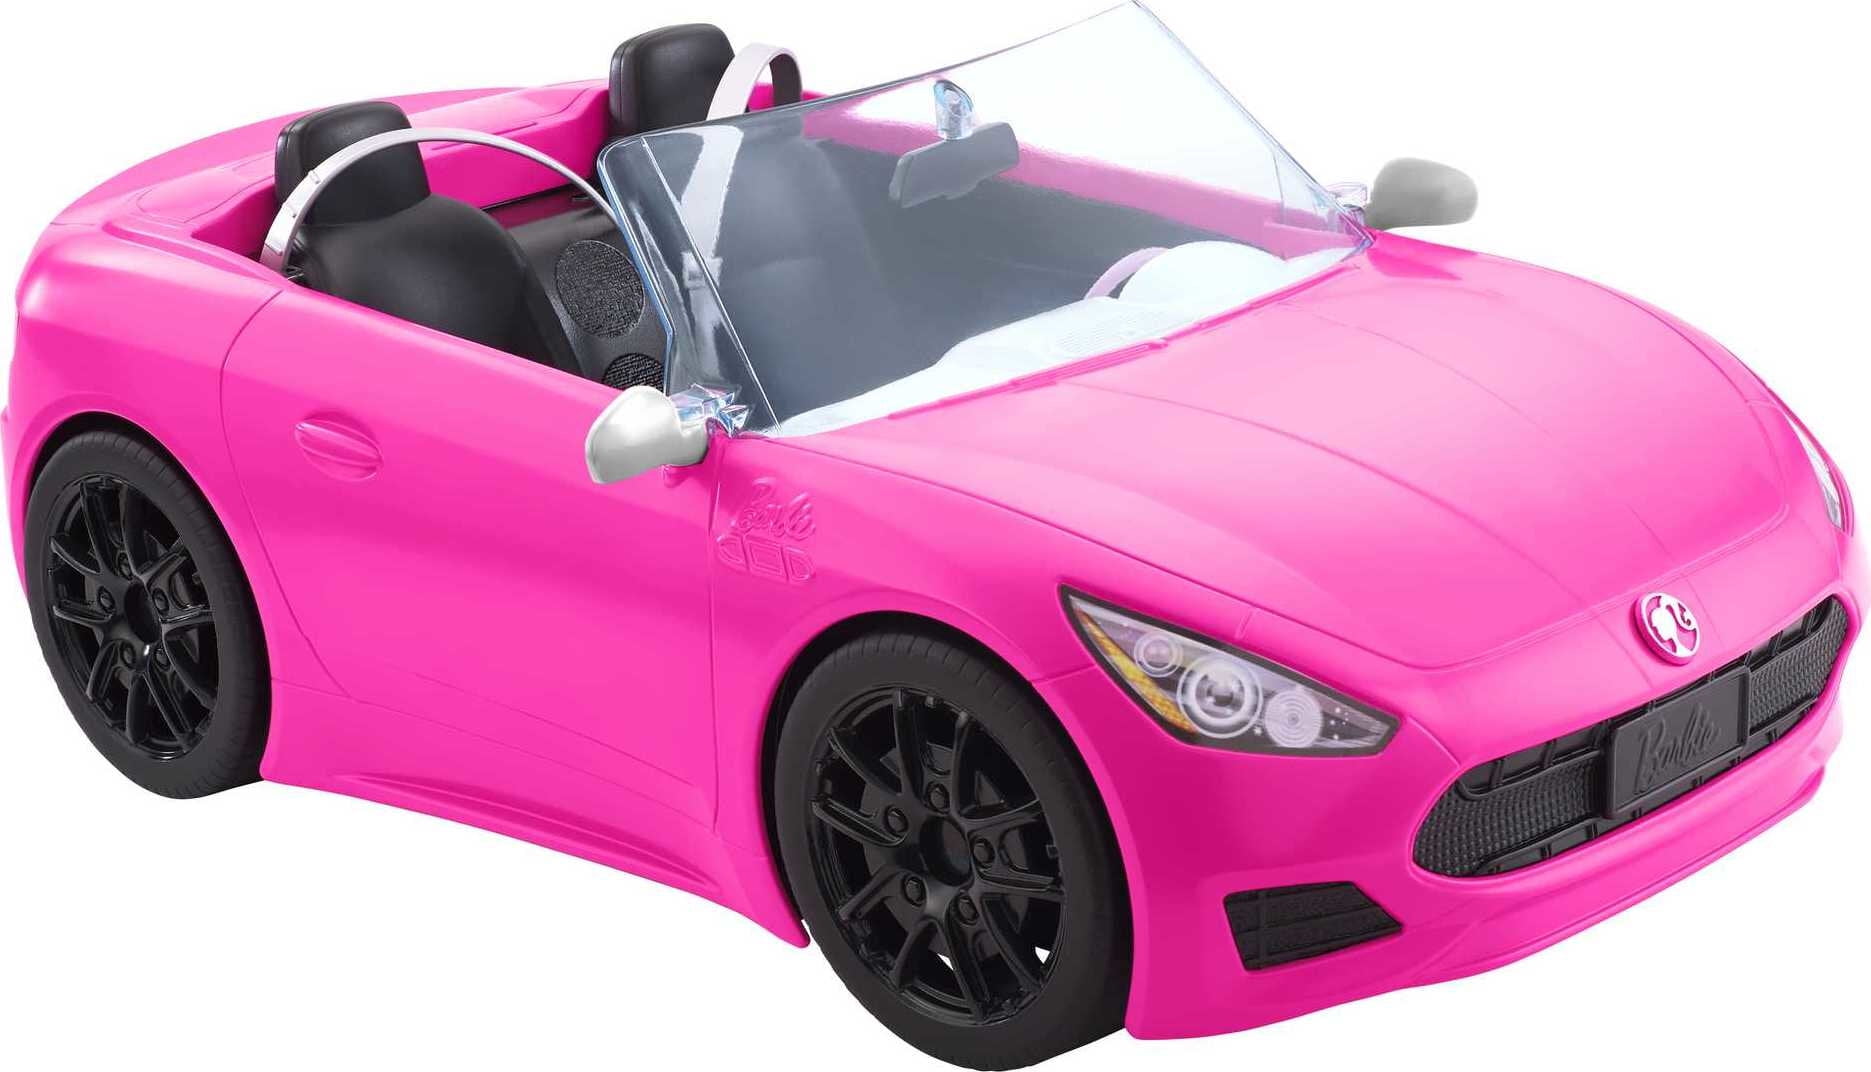 Barbie Convertible Toy Car, Bright Pink with Seatbelts and Rolling Wheels (Seats 2 Dolls)